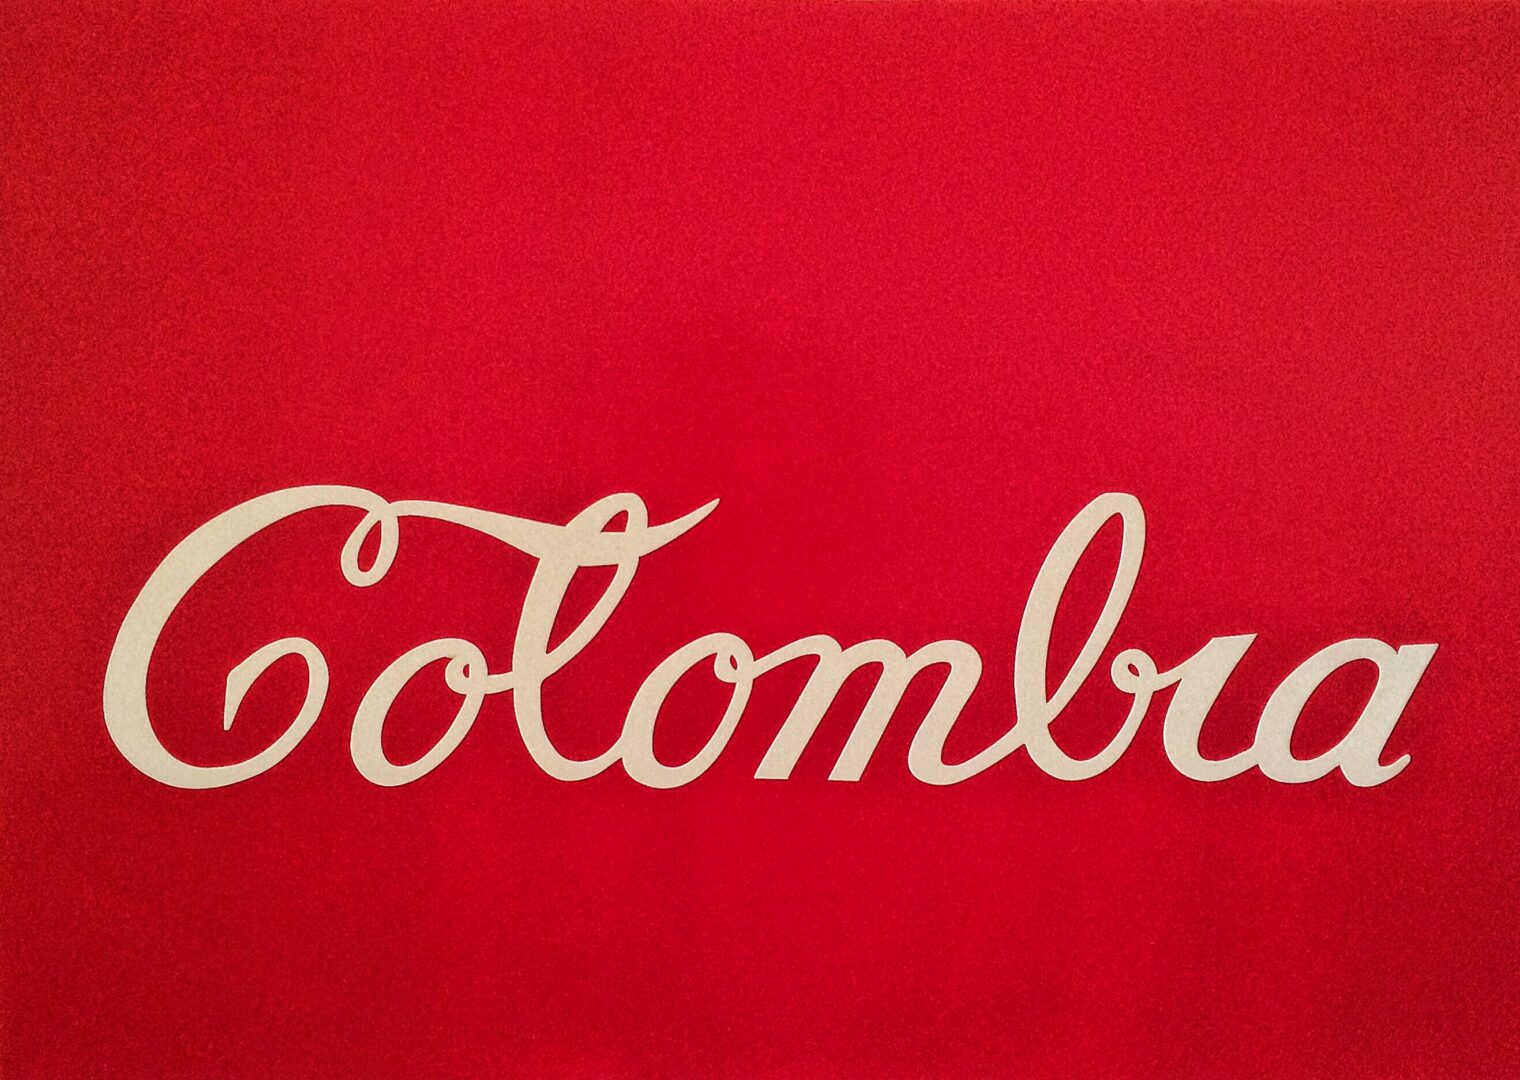 The word colombia is written on a red background.